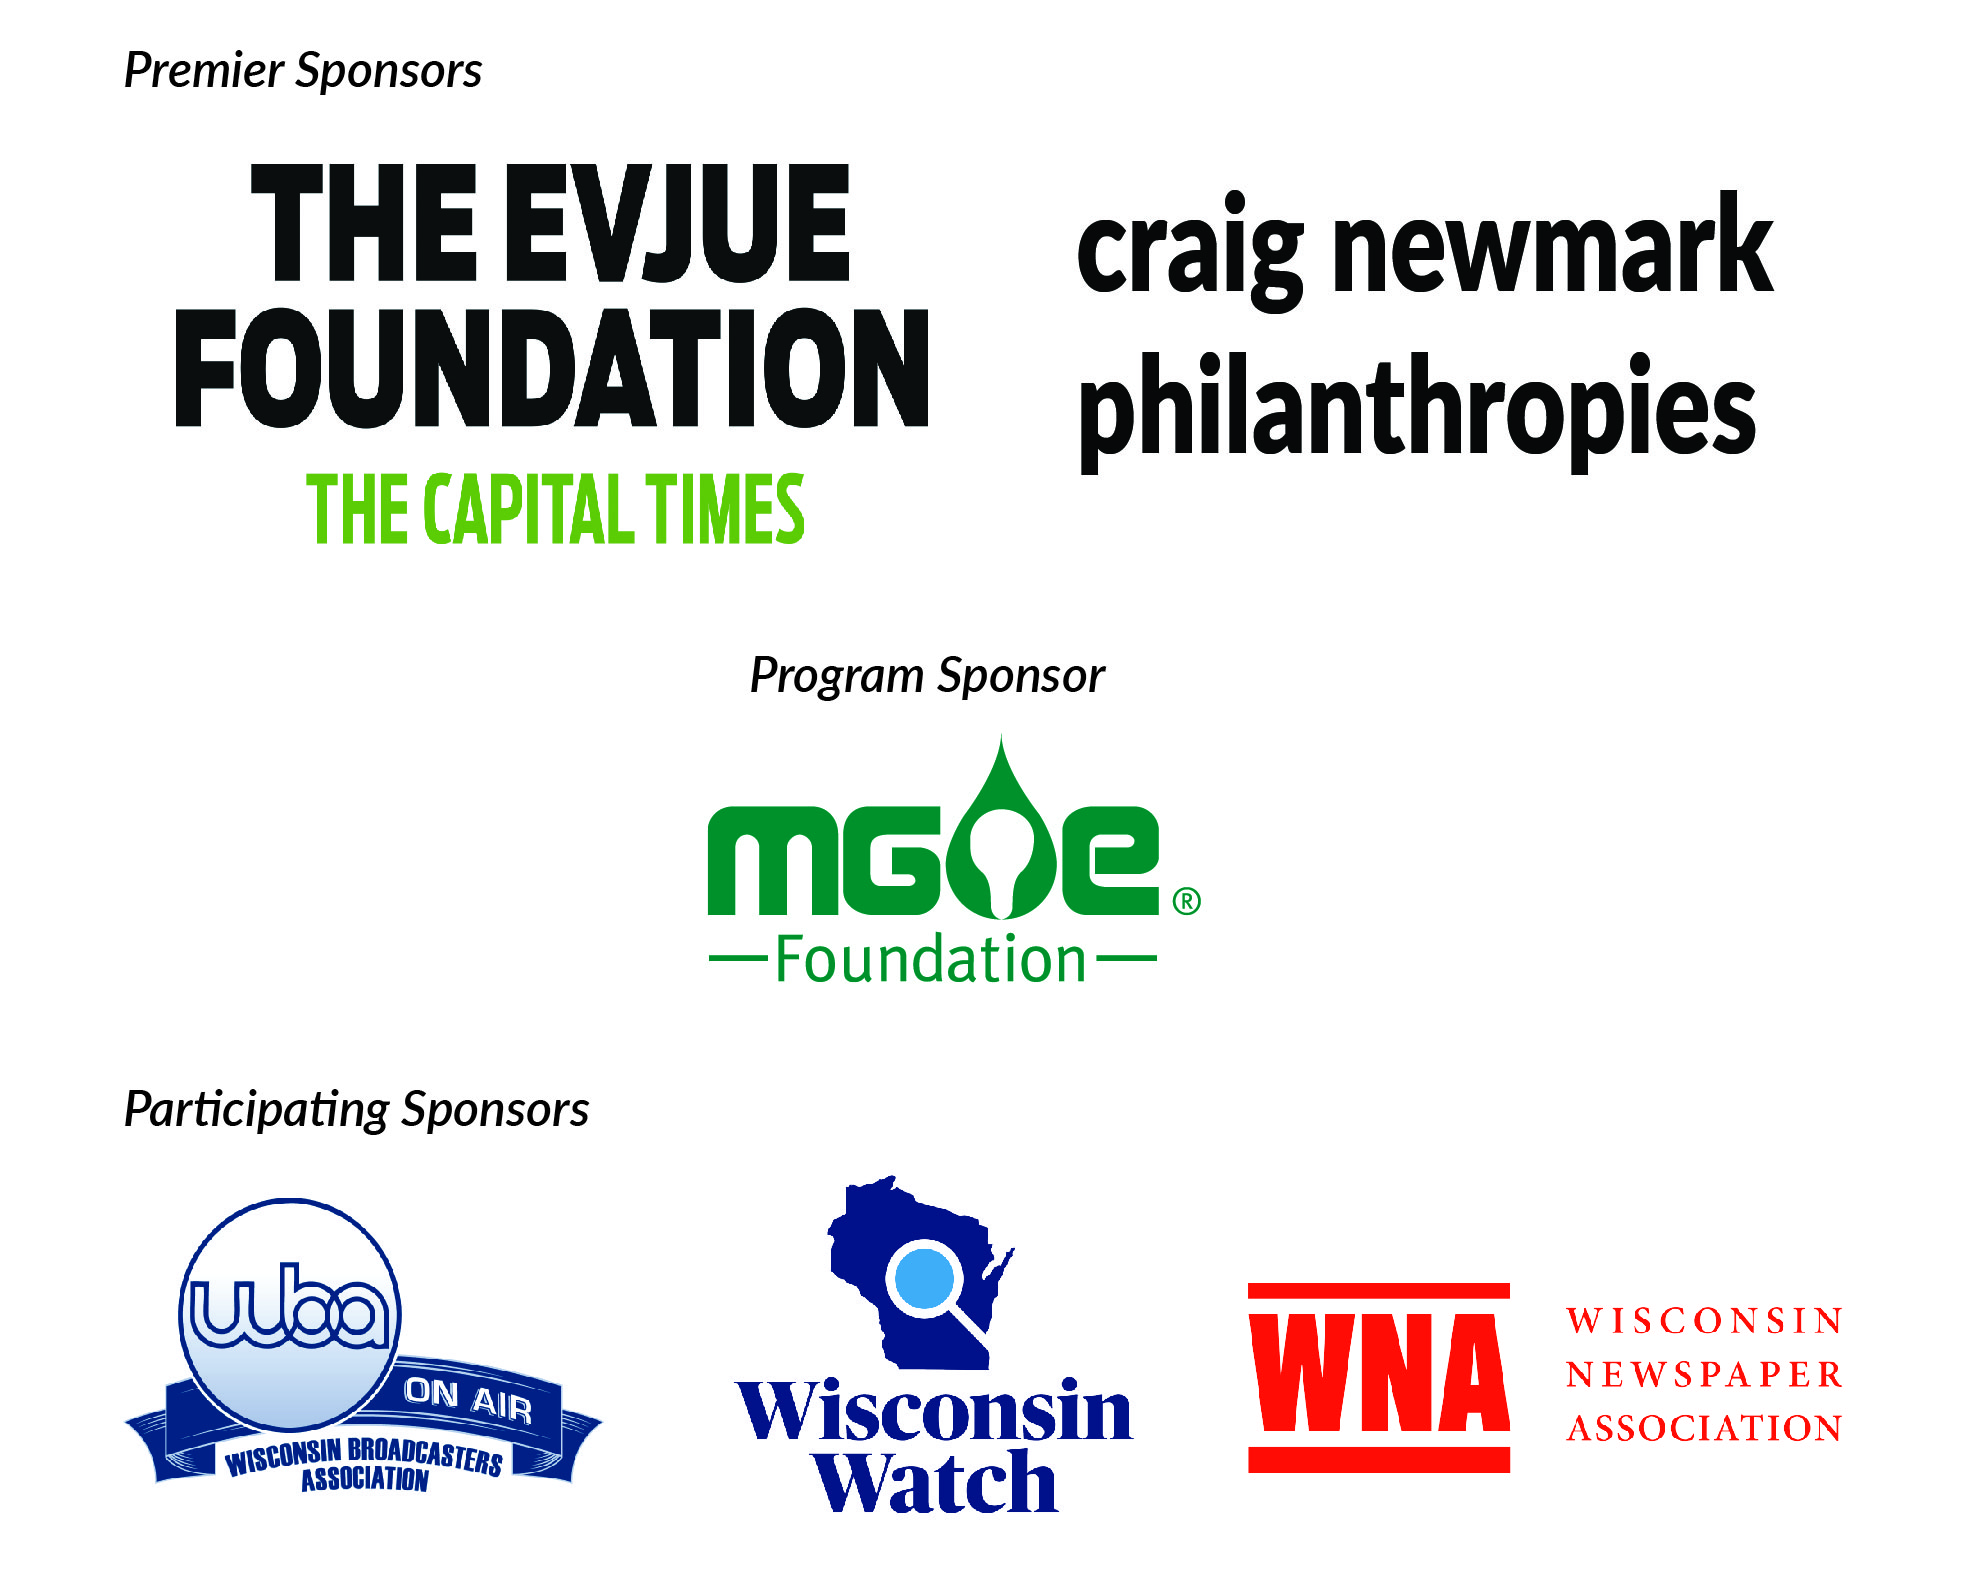 Logos for all sponsors including Premier Sponsors, The Evjue Foundation (The Capital Times), Craig Newark Philanthropies; Program Sponsor: MG&E Foundation; Participating Sponsors, Wisconsin Broadcasters Association, Wisconsin Watch, Wisconsin Newspaper Association